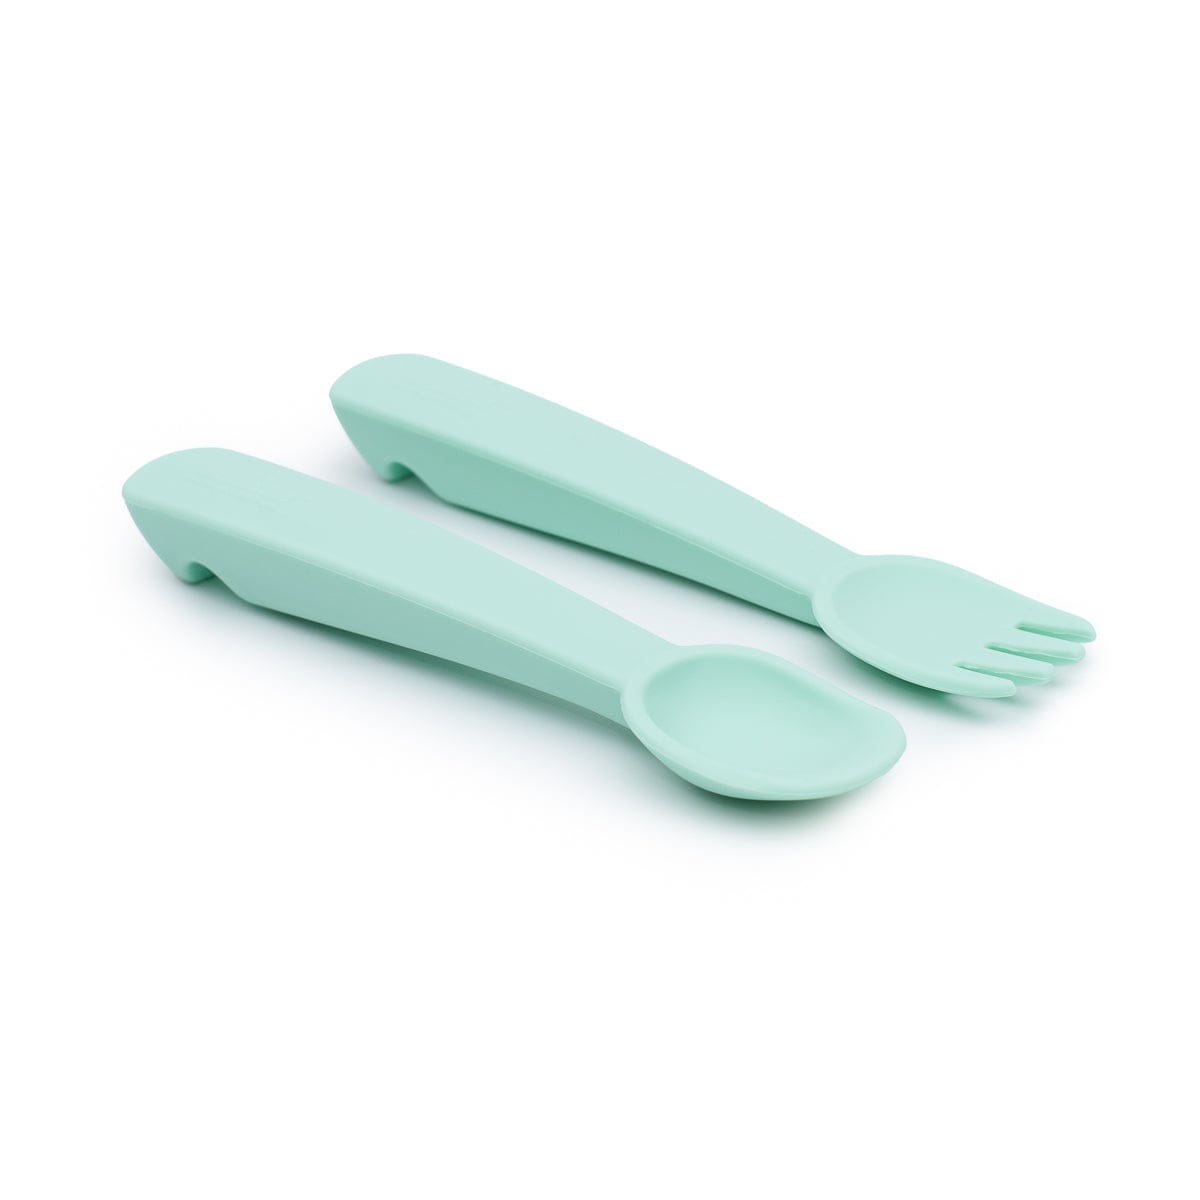 We Might Be Tiny Silicone Feedie Fork & Spoon Set We Might Be Tiny Silicone Feedie Fork & Spoon Set 